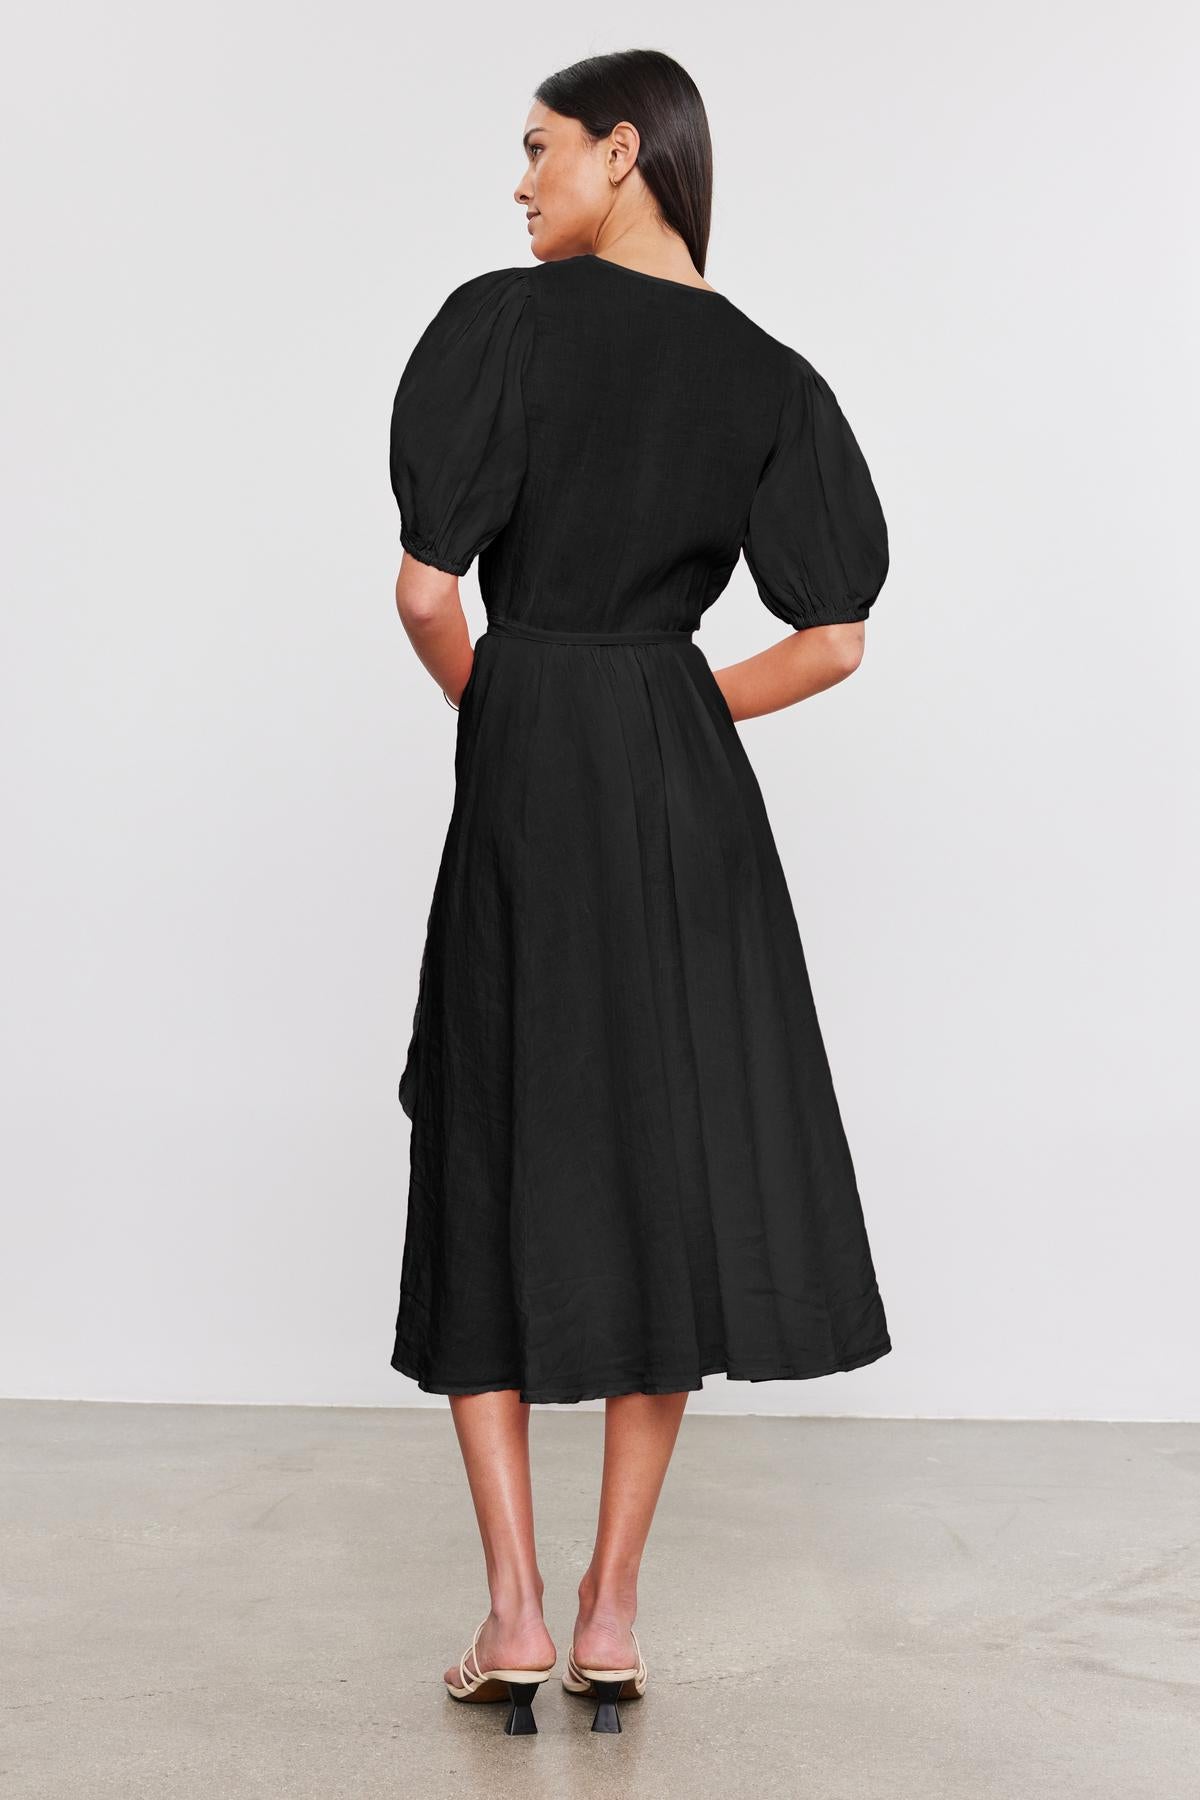   Woman in a black Velvet by Graham & Spencer Dalene Linen Dress with puffed sleeves standing, viewed from the back. She wears beige high heels and looks over her shoulder. 